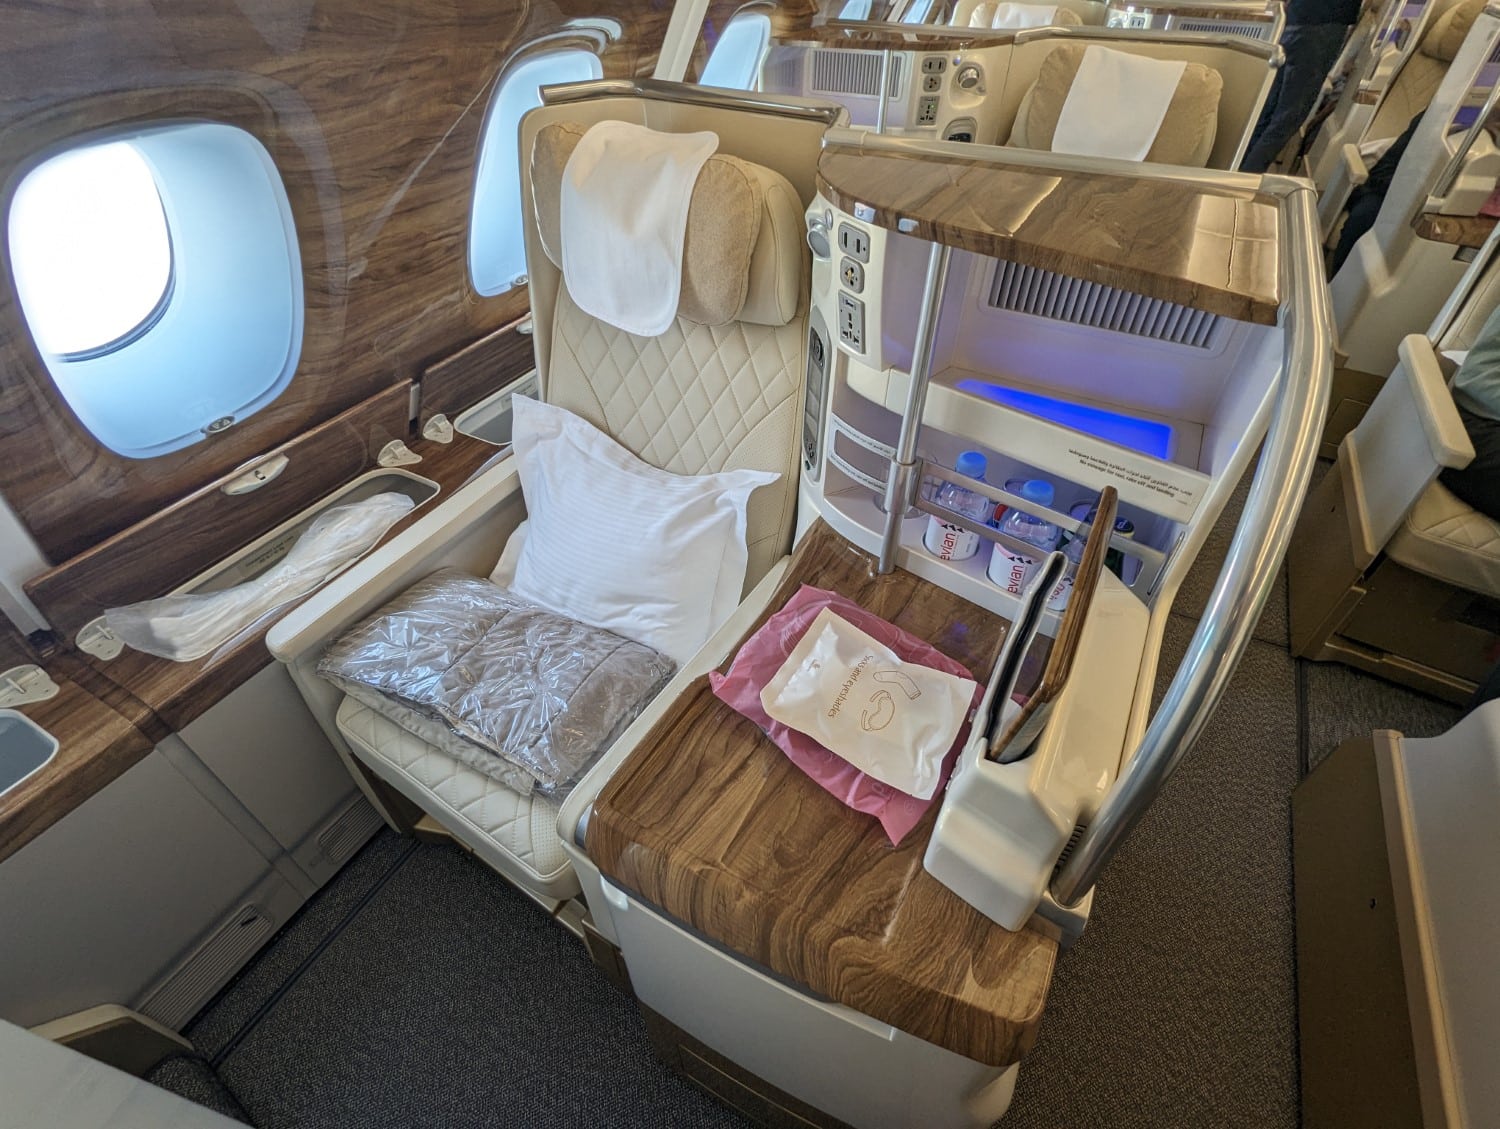 Emirates A380 business class seat.